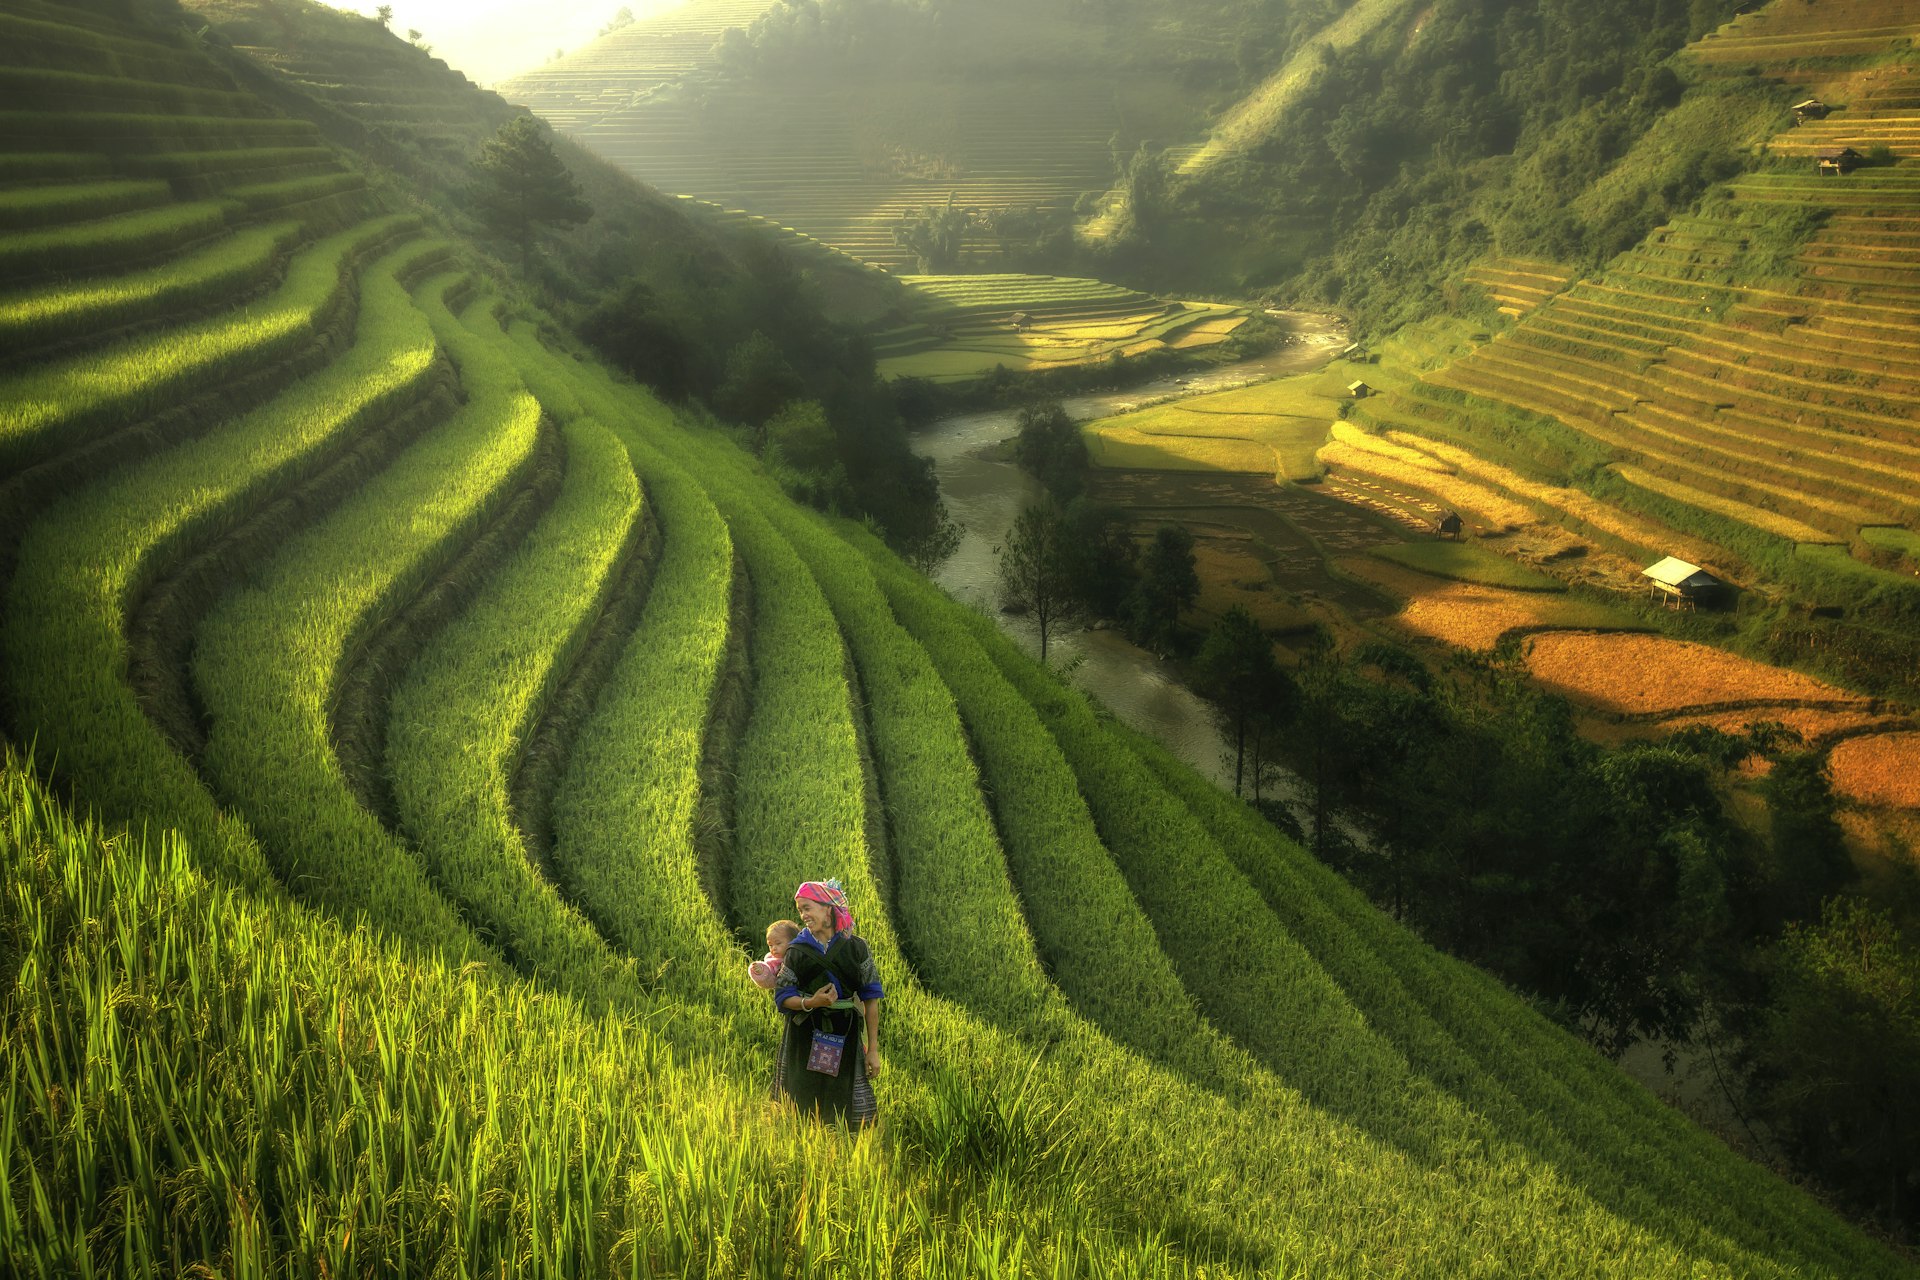 A mother carrying a child on her back walks through rice terraces